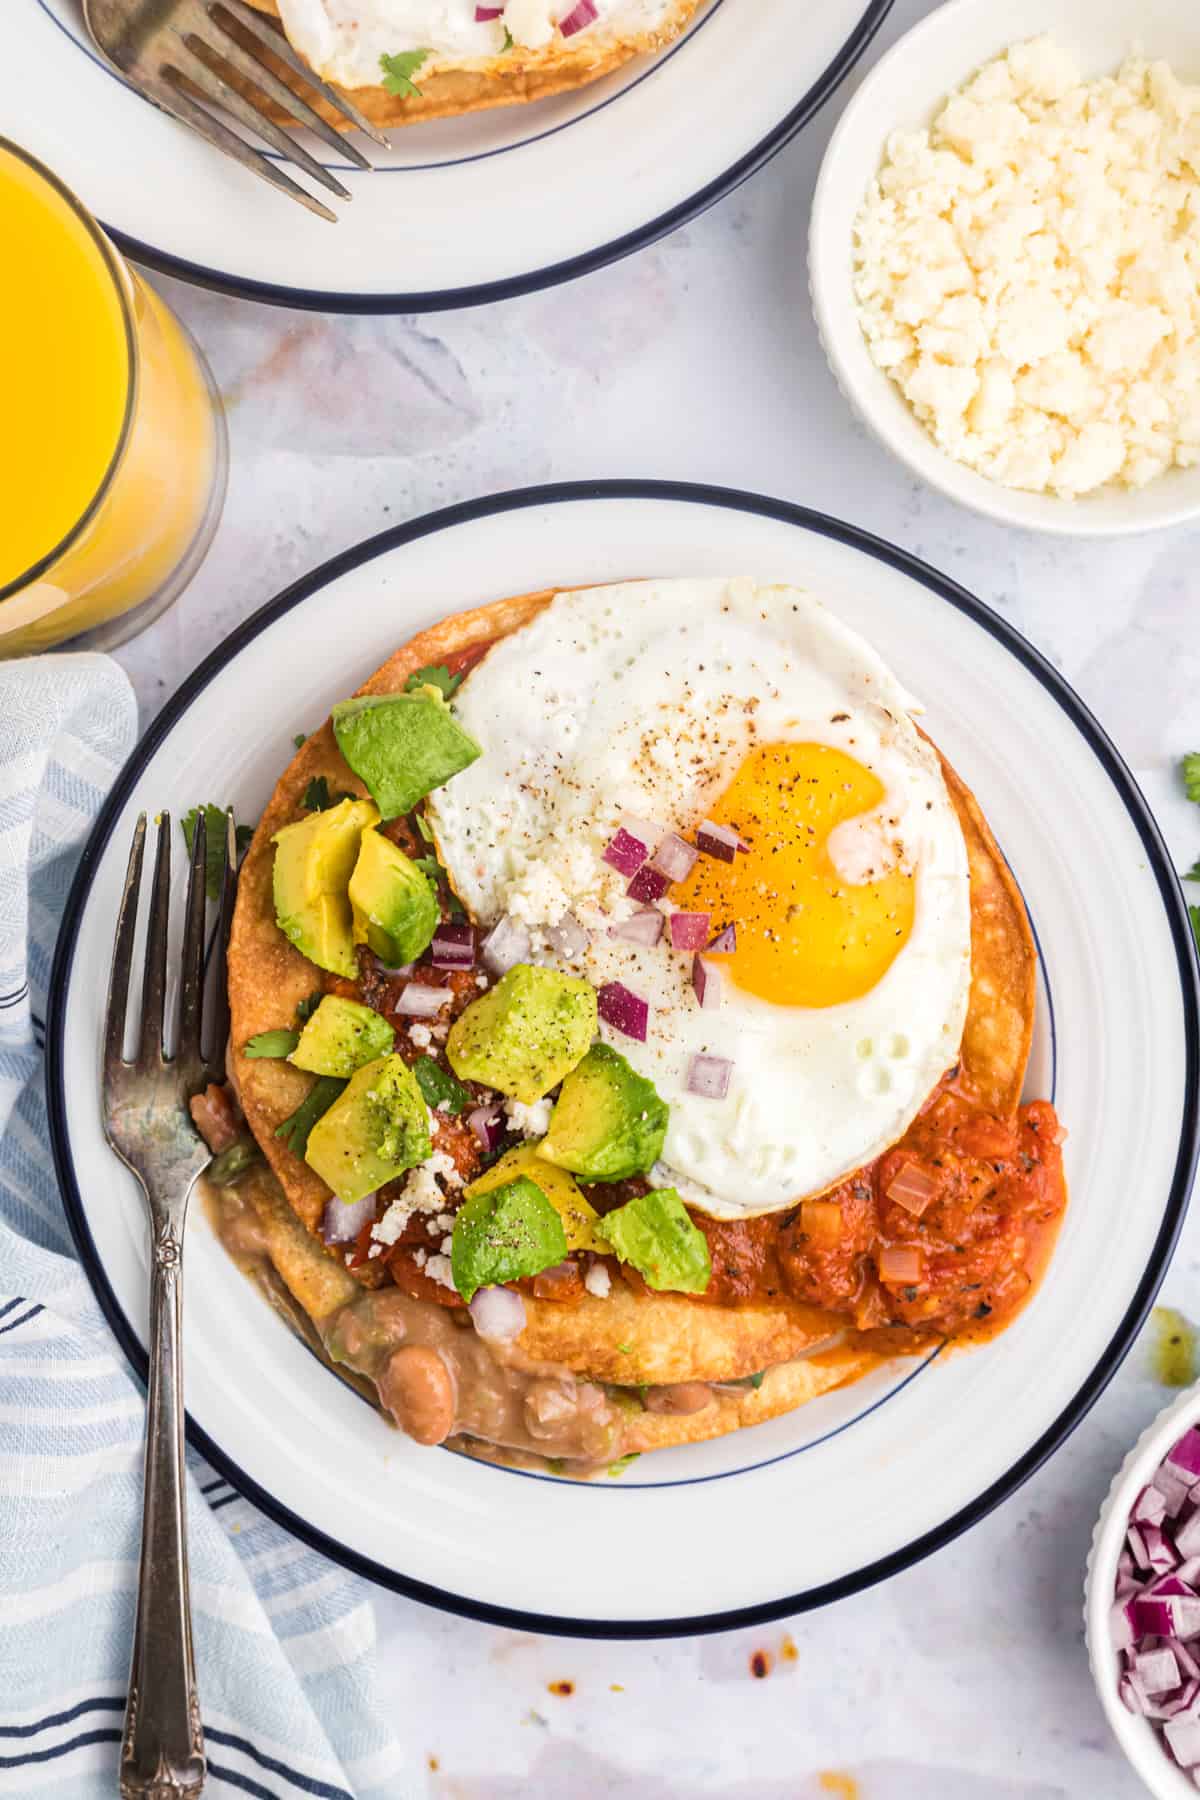 A serving of huevos rancheros is plated on a white and blue round plate.